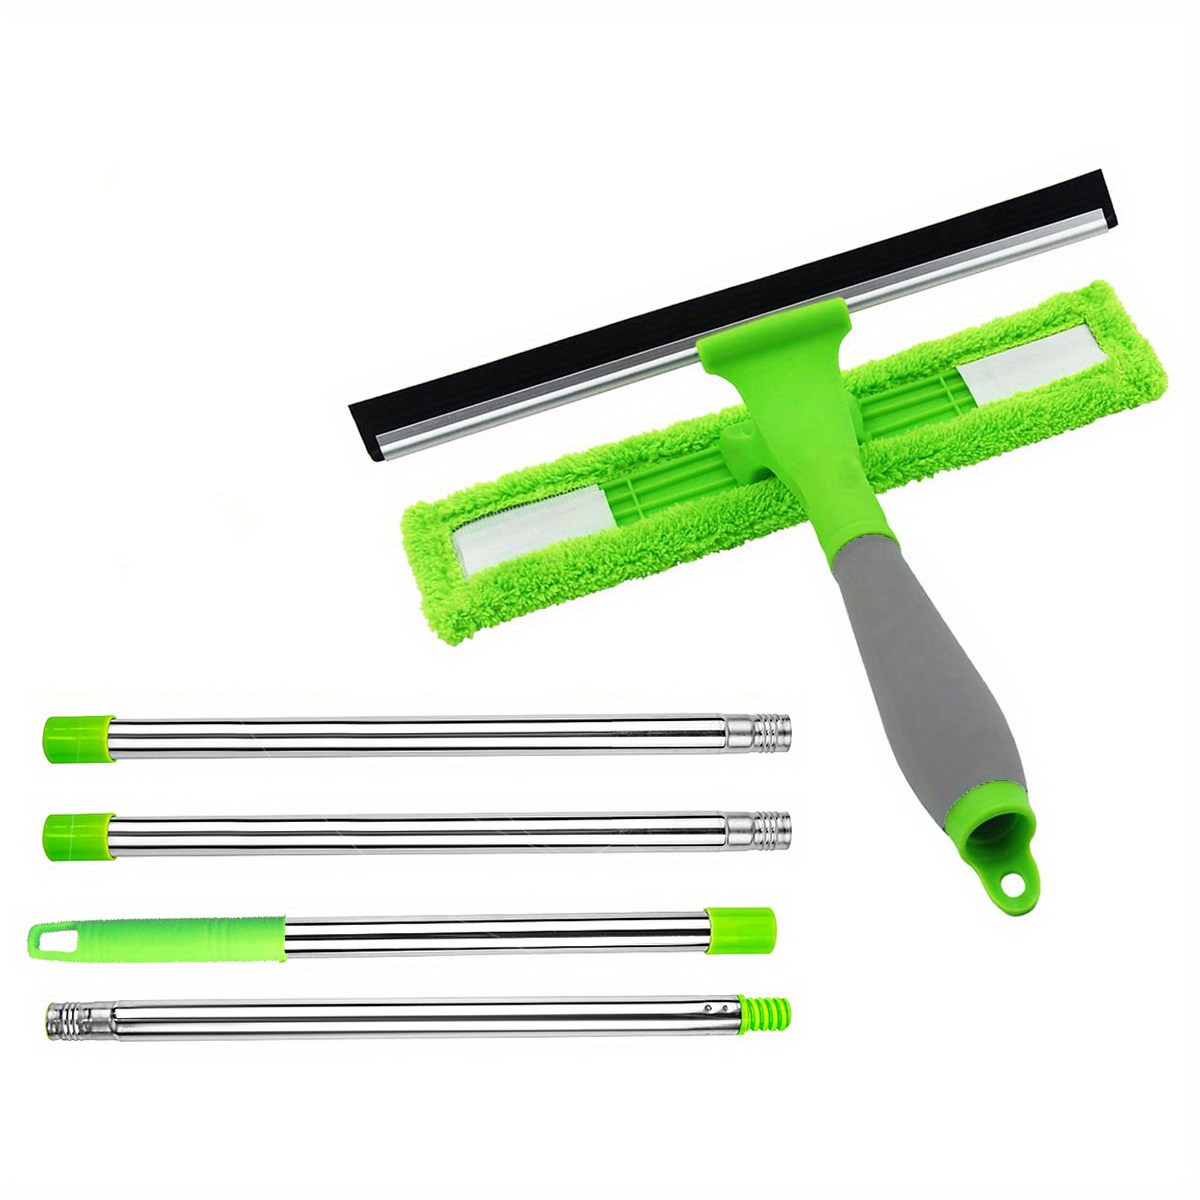  Window Squeegee for Home, Window Cleaner Tool with Extension  Pole 20.3''-30'', Window Washer for Shower, Car Windshield, Mirror, Glass  Cleaning : Health & Household